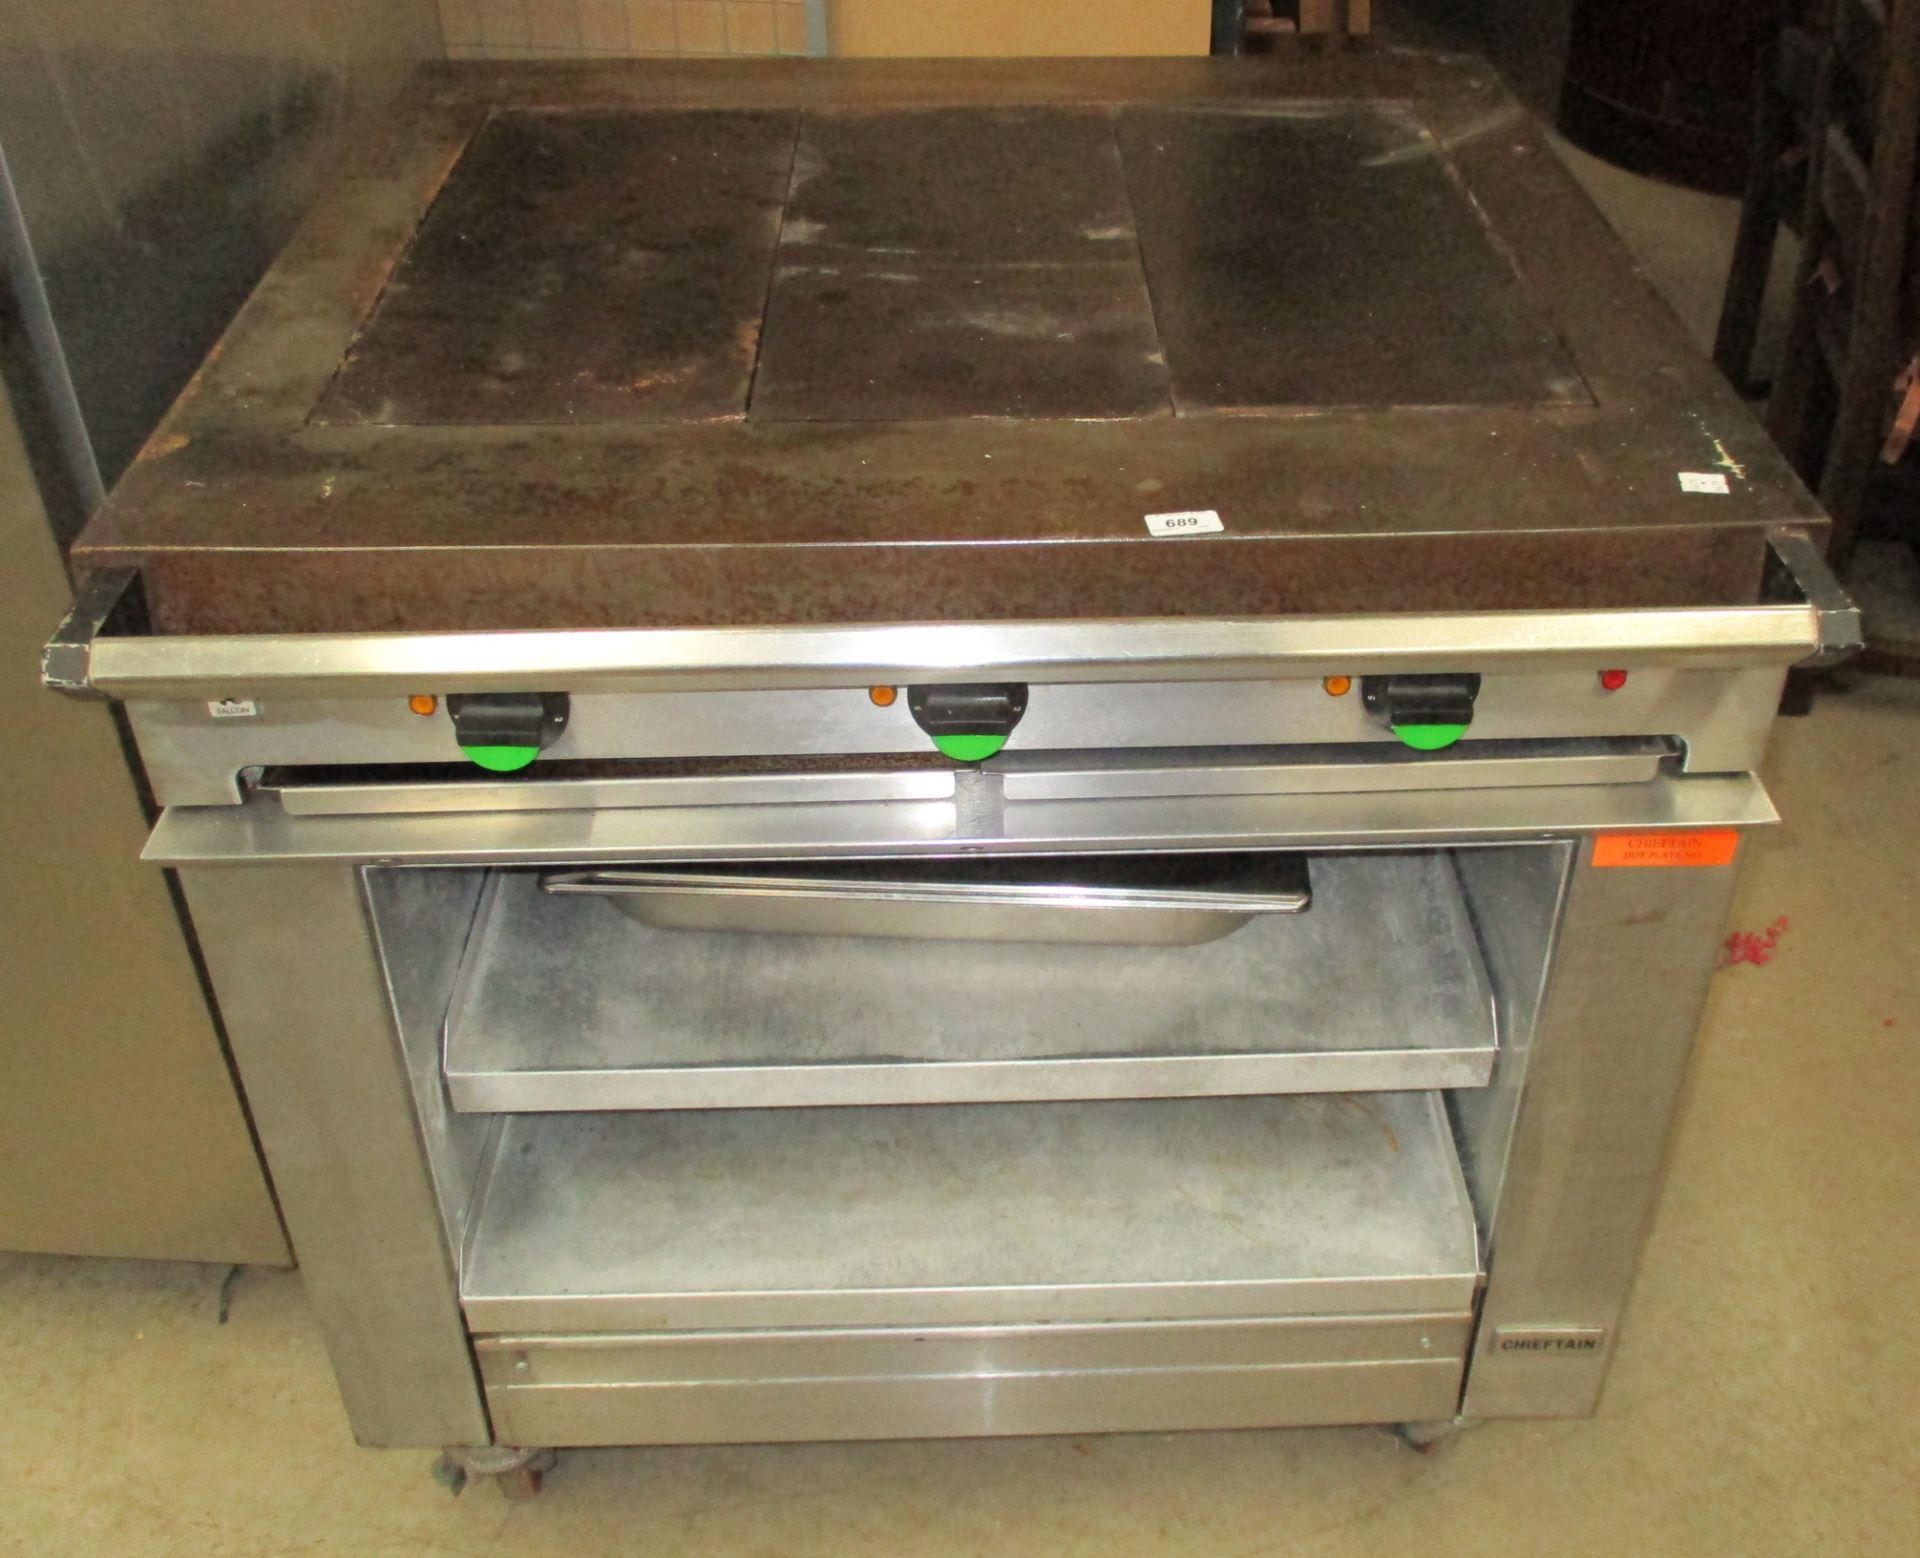 A Falcon Chieftain stainless steel three hot plate electric boiling table on mobile base 3 phase